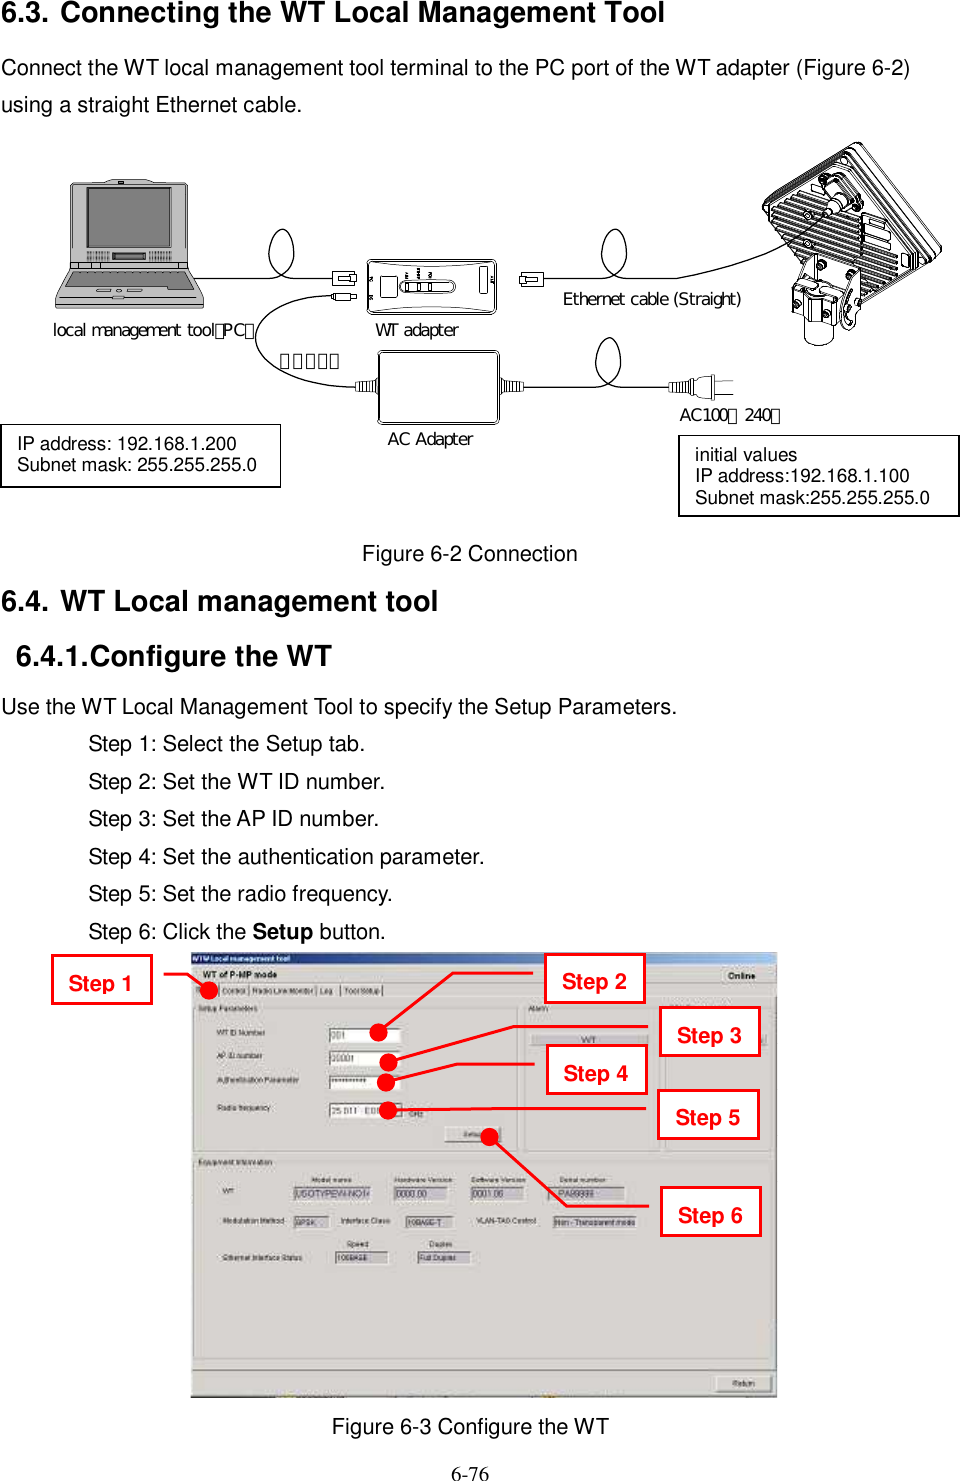   6-76   6.3. Connecting the WT Local Management Tool Connect the WT local management tool terminal to the PC port of the WT adapter (Figure 6-2) using a straight Ethernet cable.  Figure 6-2 Connection 6.4. WT Local management tool 6.4.1. Configure the WT Use the WT Local Management Tool to specify the Setup Parameters. Step 1: Select the Setup tab. Step 2: Set the WT ID number. Step 3: Set the AP ID number. Step 4: Set the authentication parameter. Step 5: Set the radio frequency. Step 6: Click the Setup button.                     Figure 6-3 Configure the WT IP address: 192.168.1.200 Subnet mask: 255.255.255.0  WT adapterAC Adapter AC100∼240ＶＤＣ２４Ｖlocal management tool（PC）Ethernet cable (Straight)initial values IP address:192.168.1.100 Subnet mask:255.255.255.0 Step 1   Step 2 Step 3 Step 4 Step 5 Step 6 